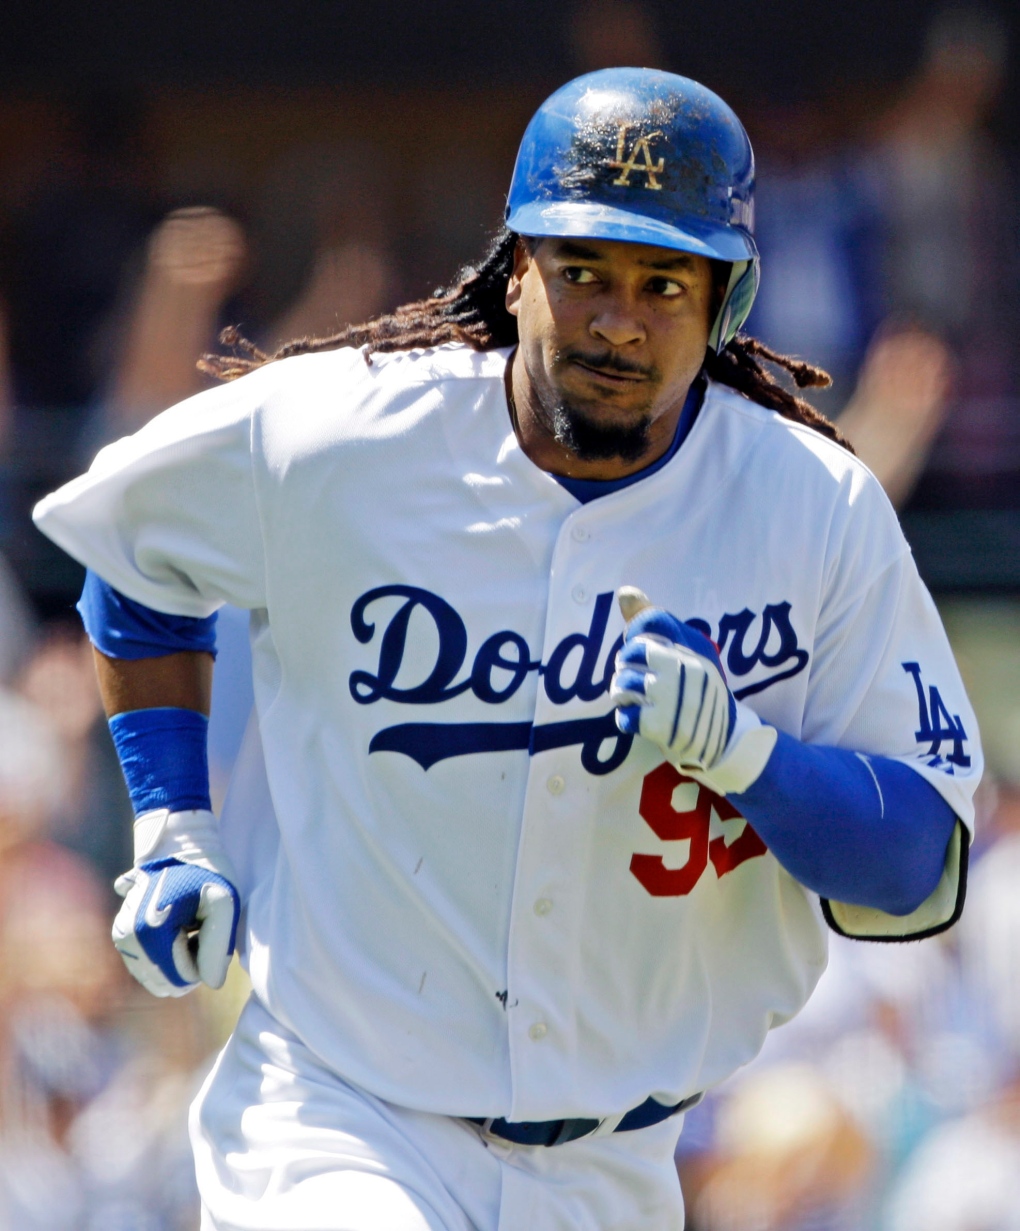 Manny Ramirez signs with Cubs as player-coach in minor leagues